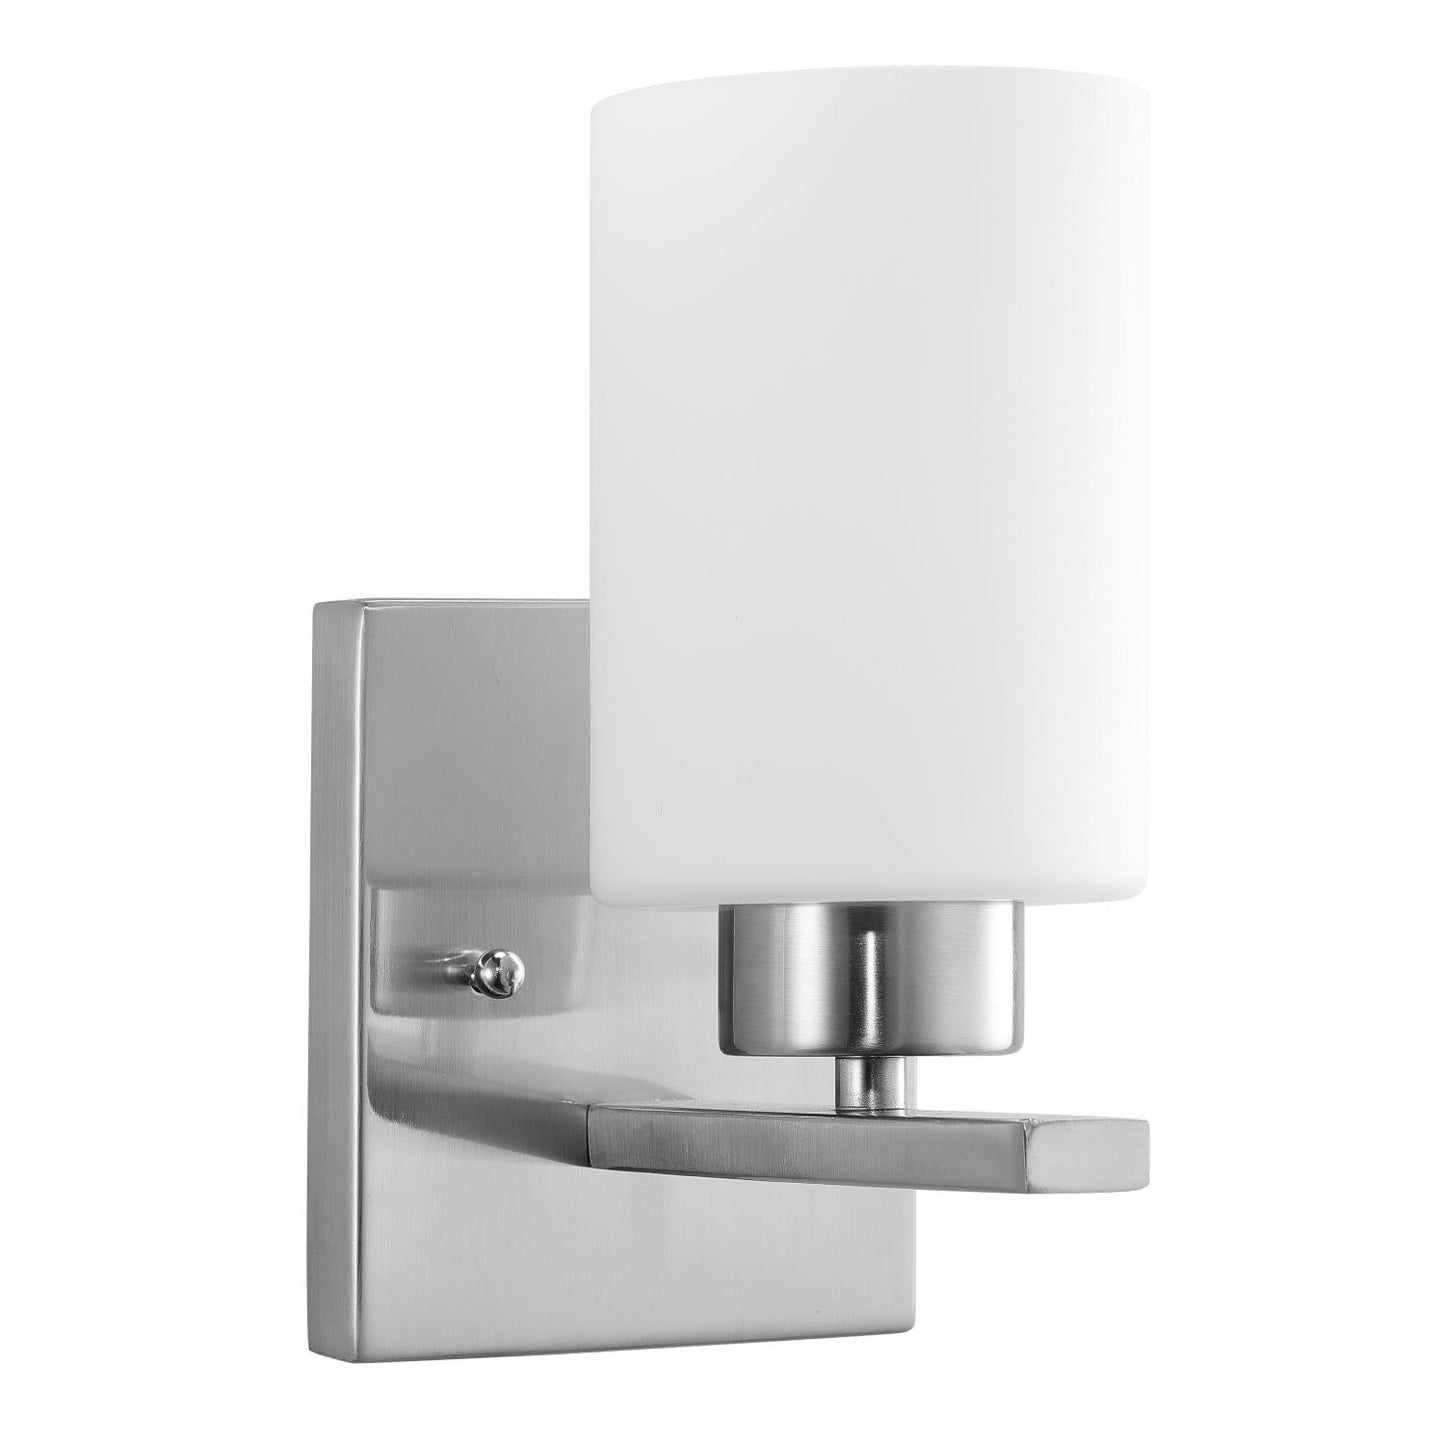 Sunlite 81319-SU 4.75″ Modern Cylinder Vanity Light Fixture, Wall Mount, Medium (E26) Socket, Standard A19 Bulb Required (60W Max), Frosted Glass Shade, ETL Listed, Brushed Nickel Base 1-Light